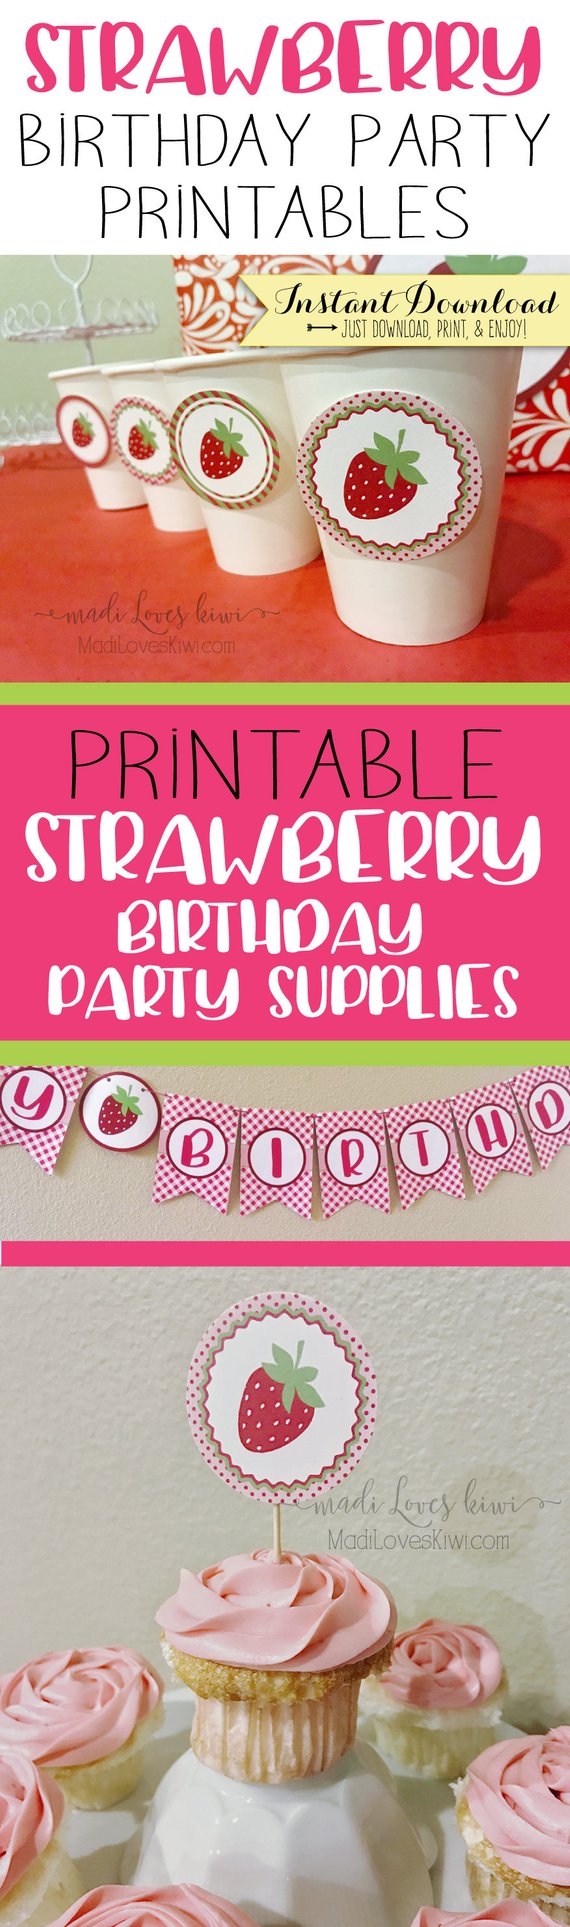 Strawberry Birthday Party Decorations, Birthday Invitations, Cupcake Toppers Printable, Welcome Sign, Thank You Tags, Digital Party Supplies